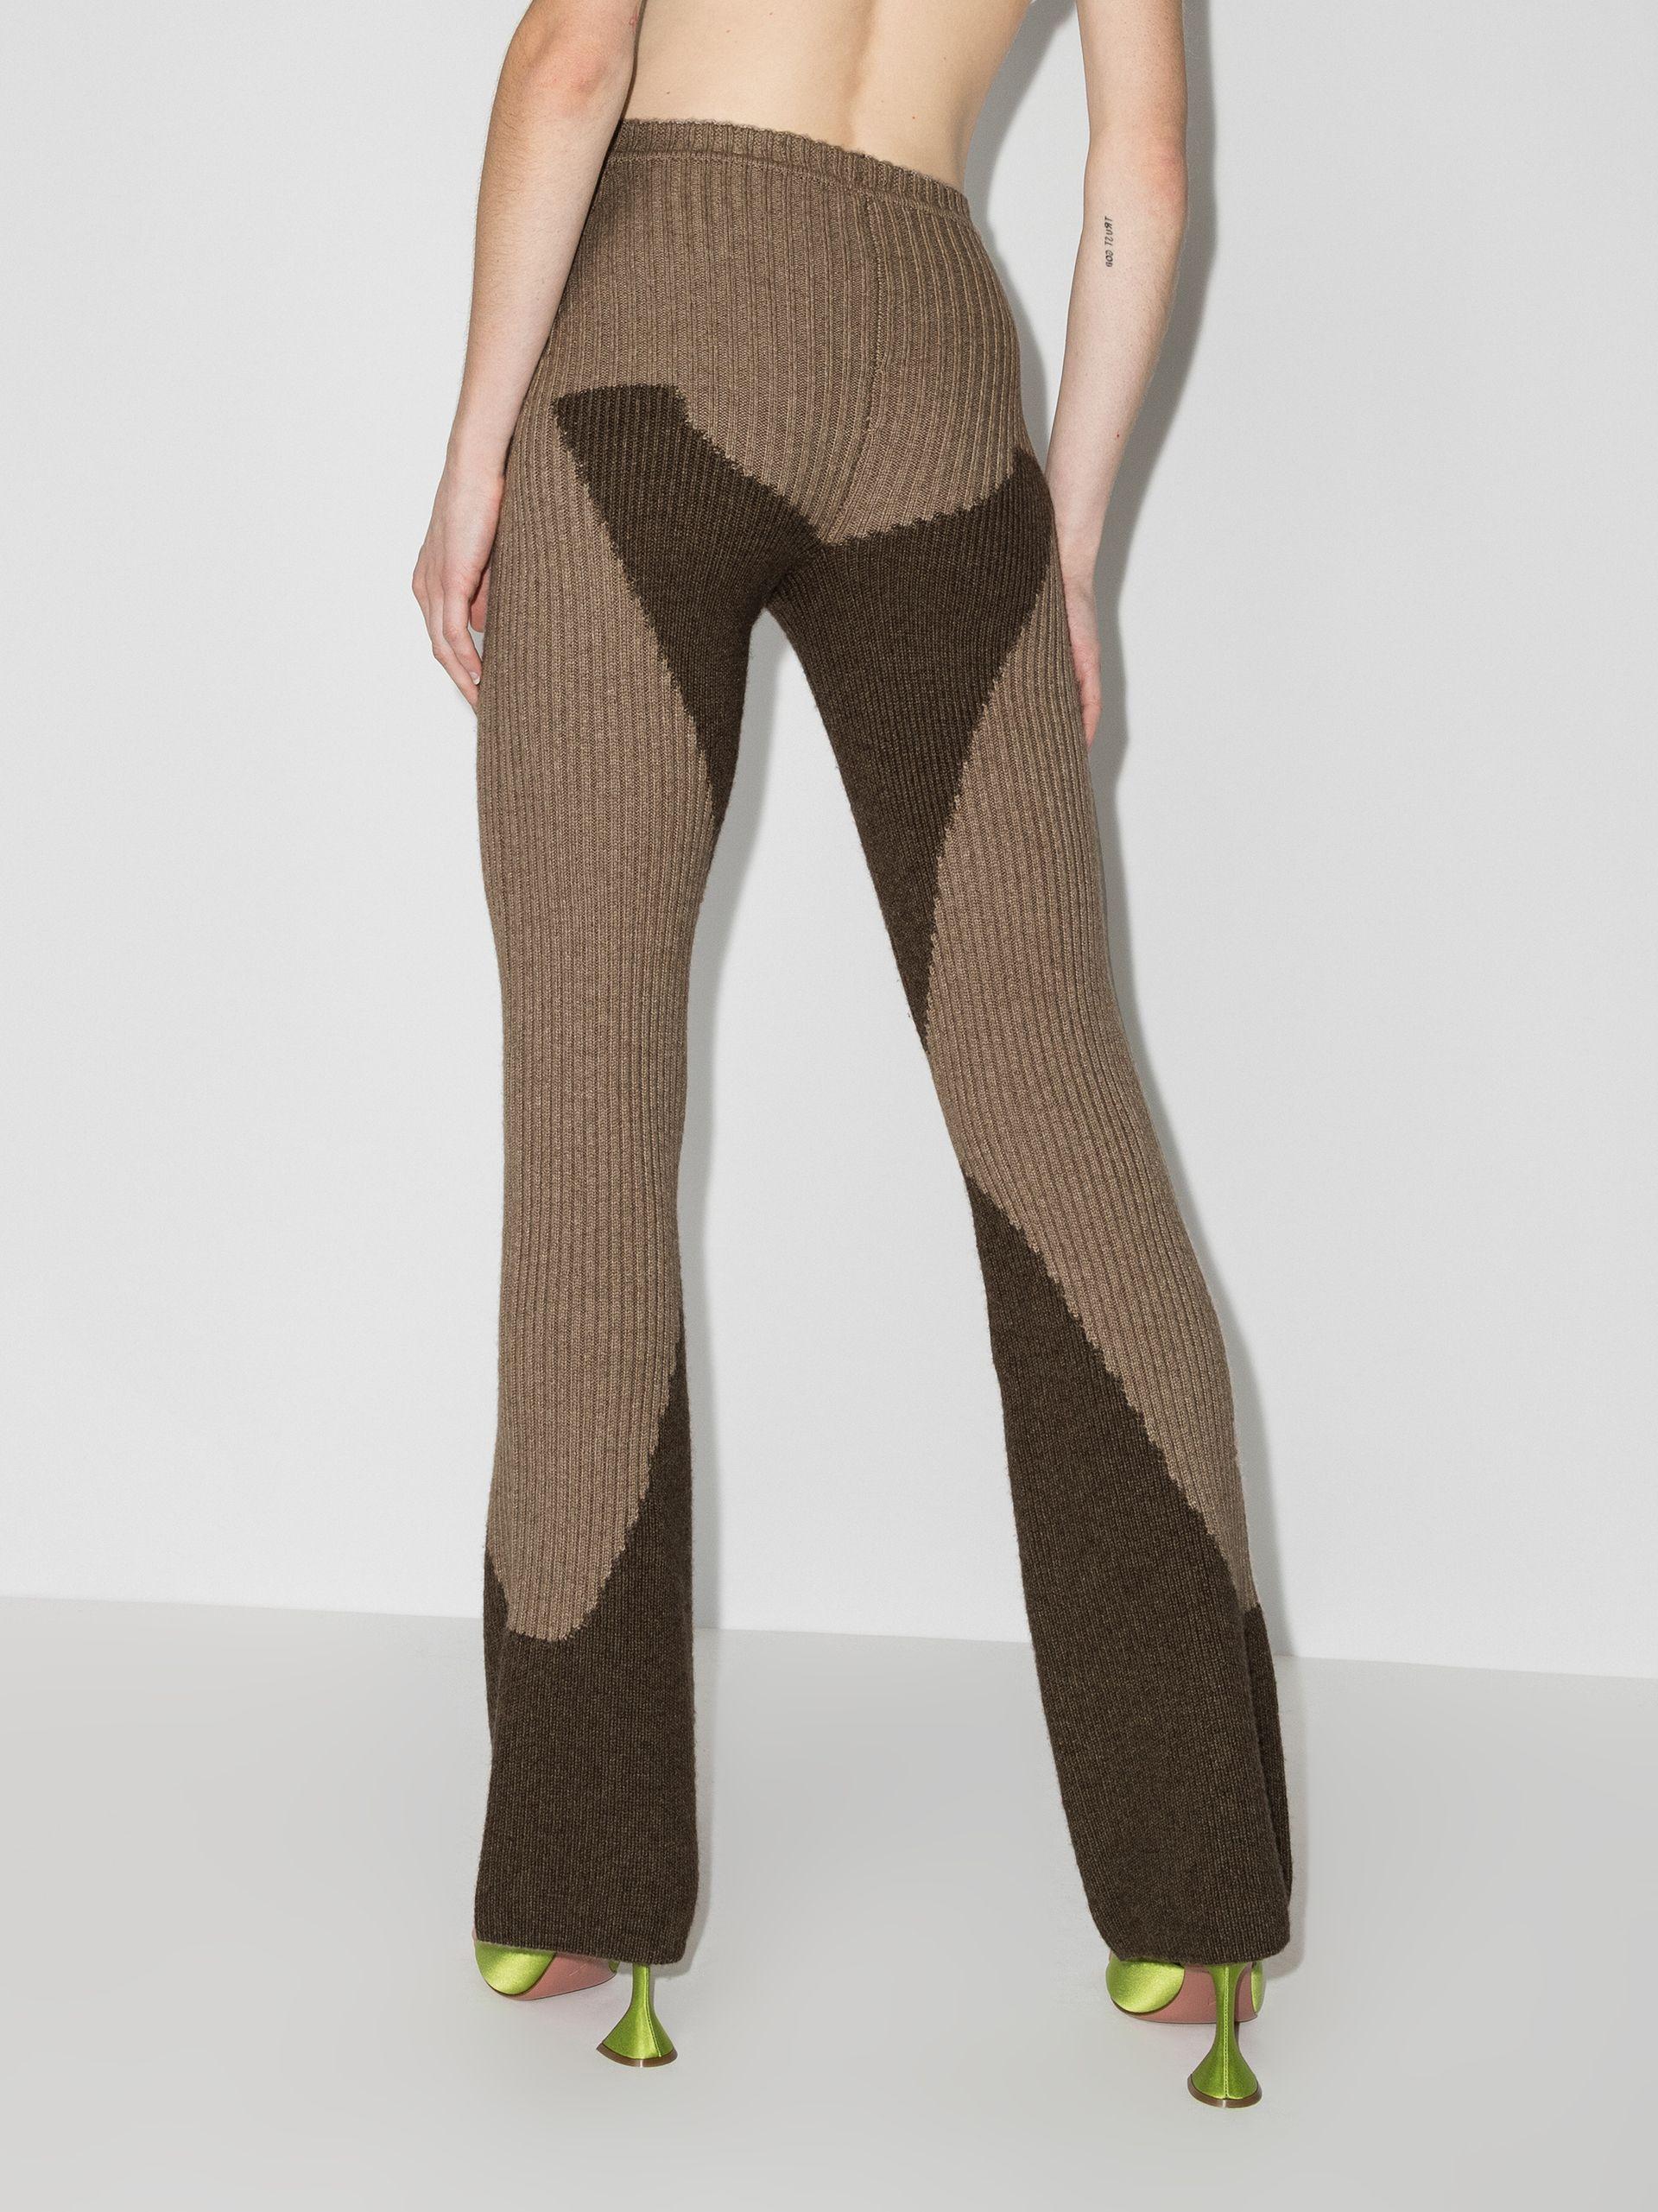 Danielle Guizio Zine Flared Knitted Trousers in Brown